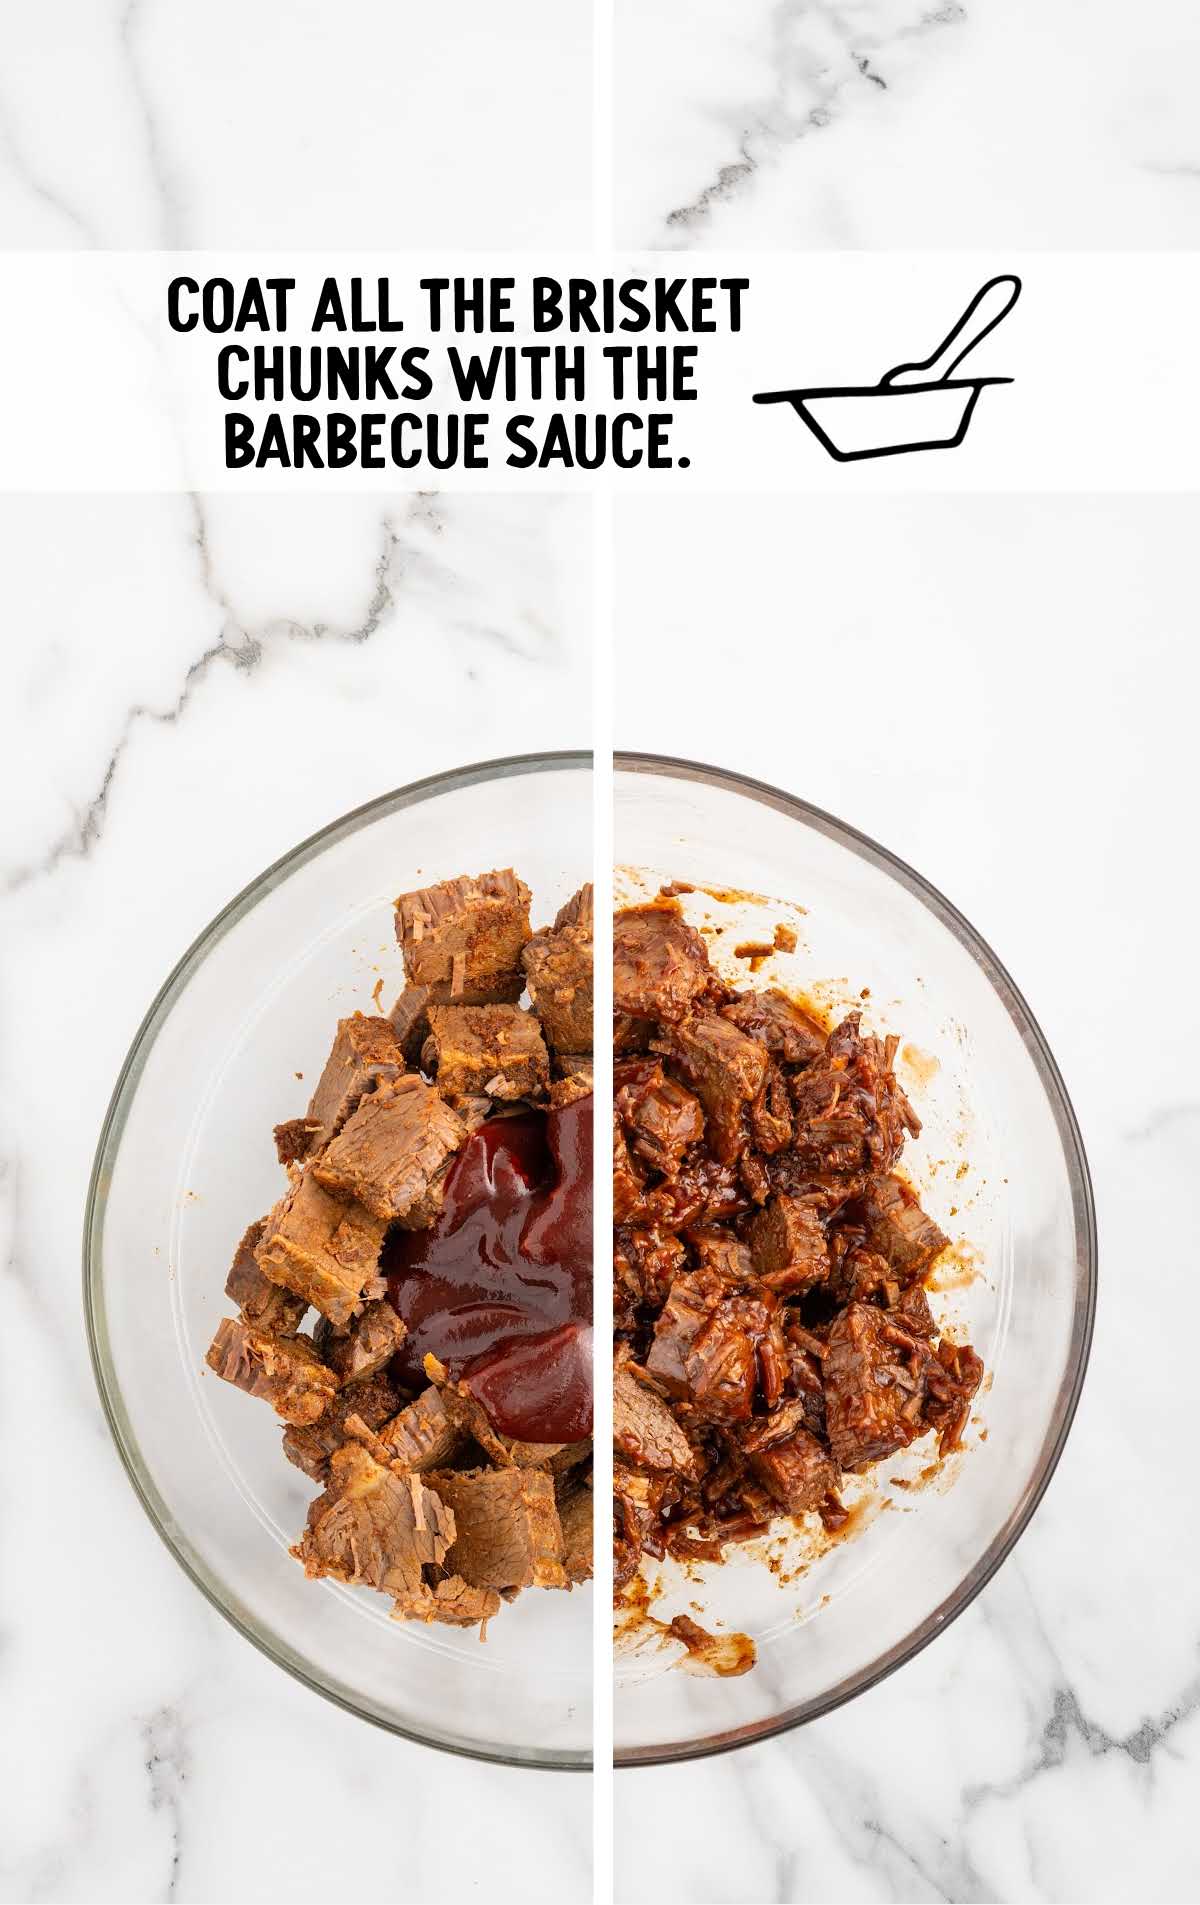 beef brisket and barbecue sauce combined in a bowl